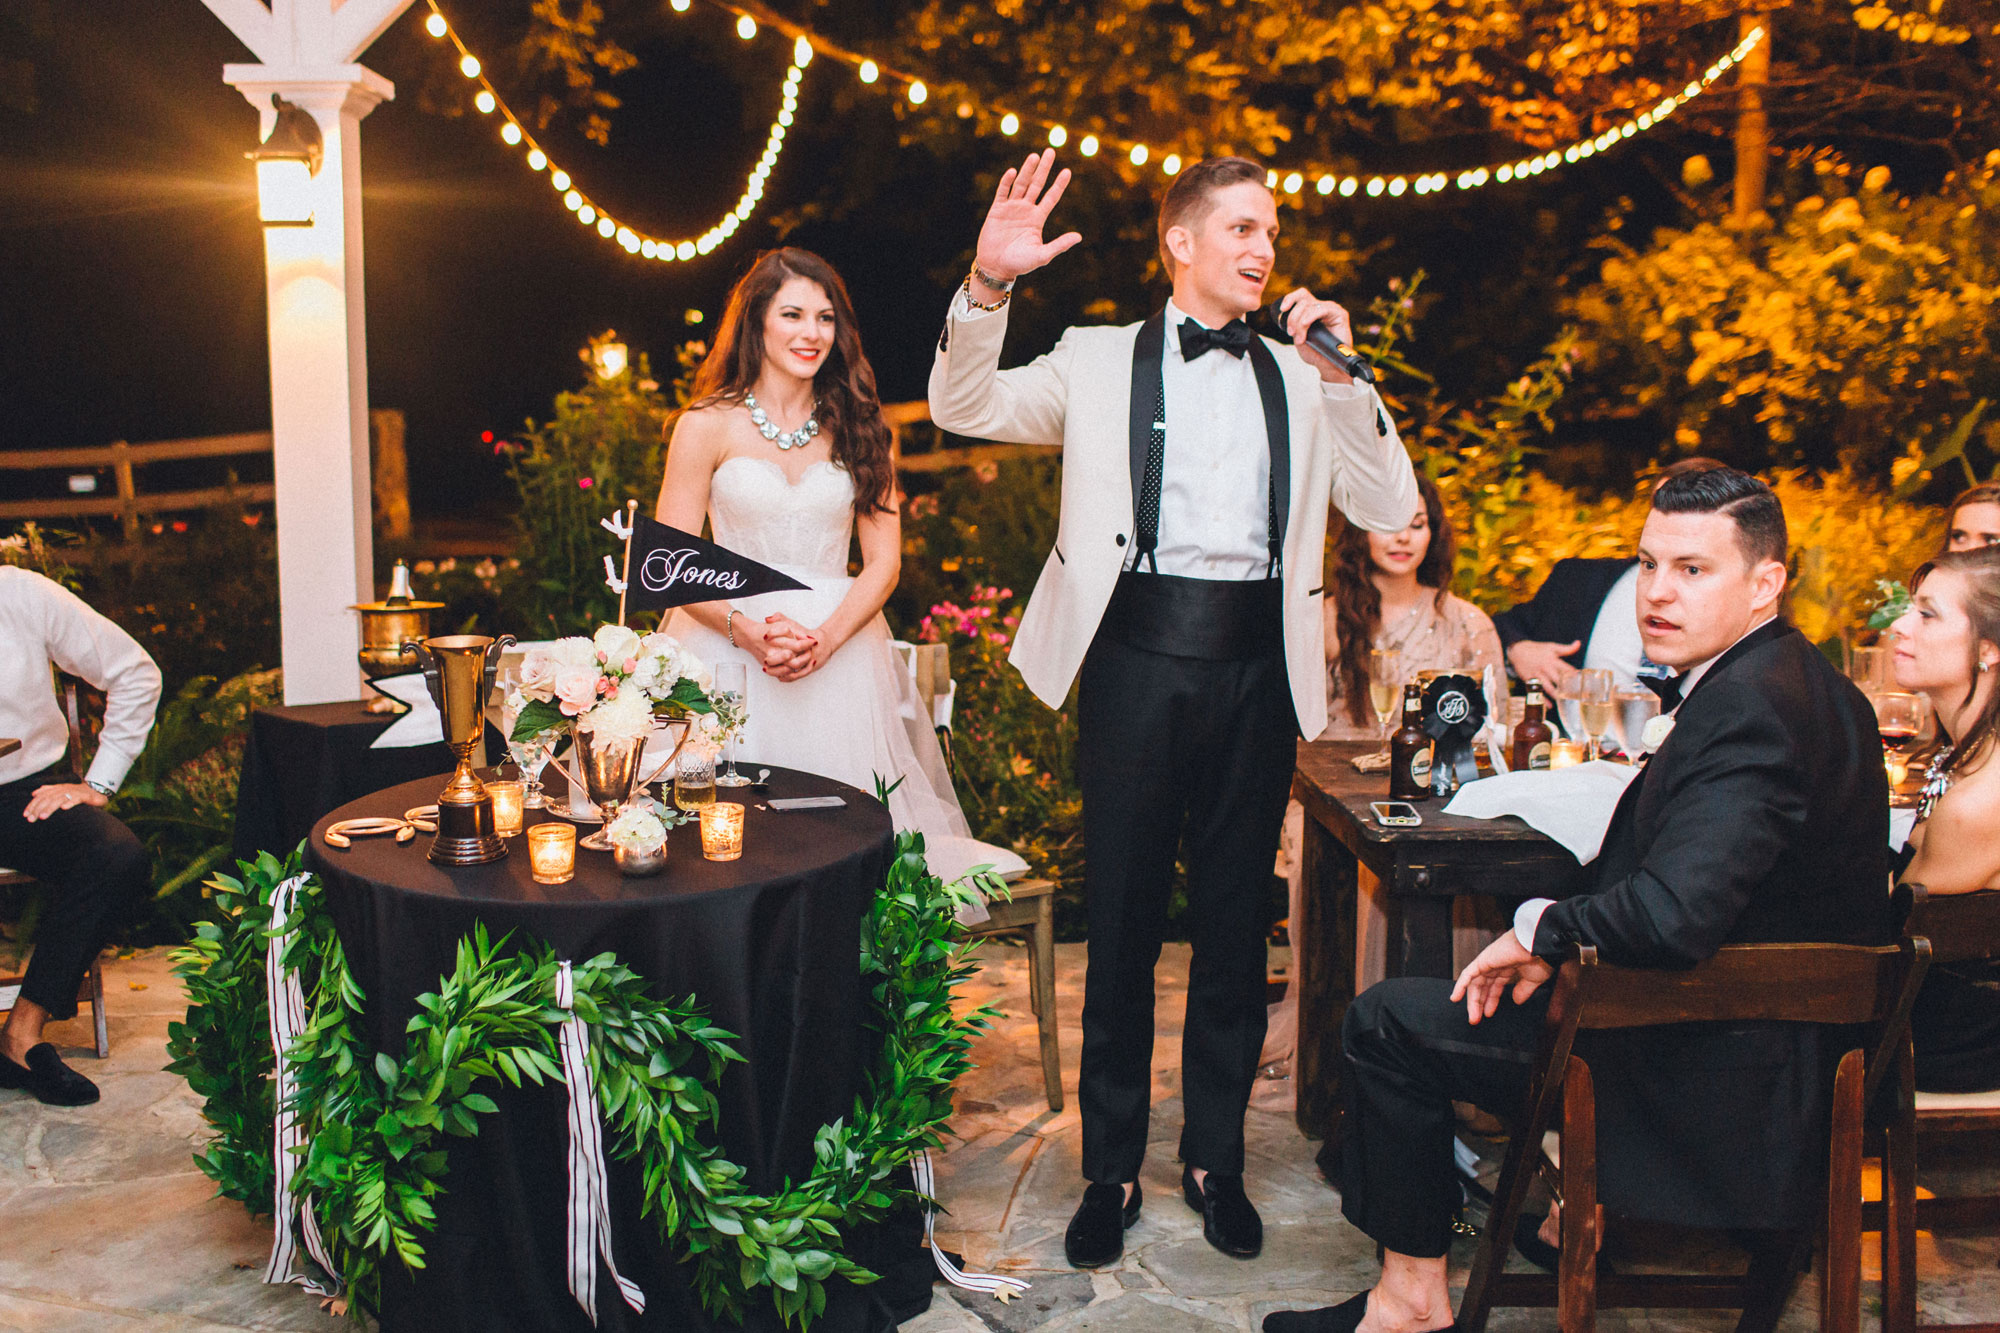 Me & Mr. Jones Wedding, Groom Thanking Guests, Table with Greenery, Black Tablecloths, Farm Tables, Rustic Glam Wedding Decor